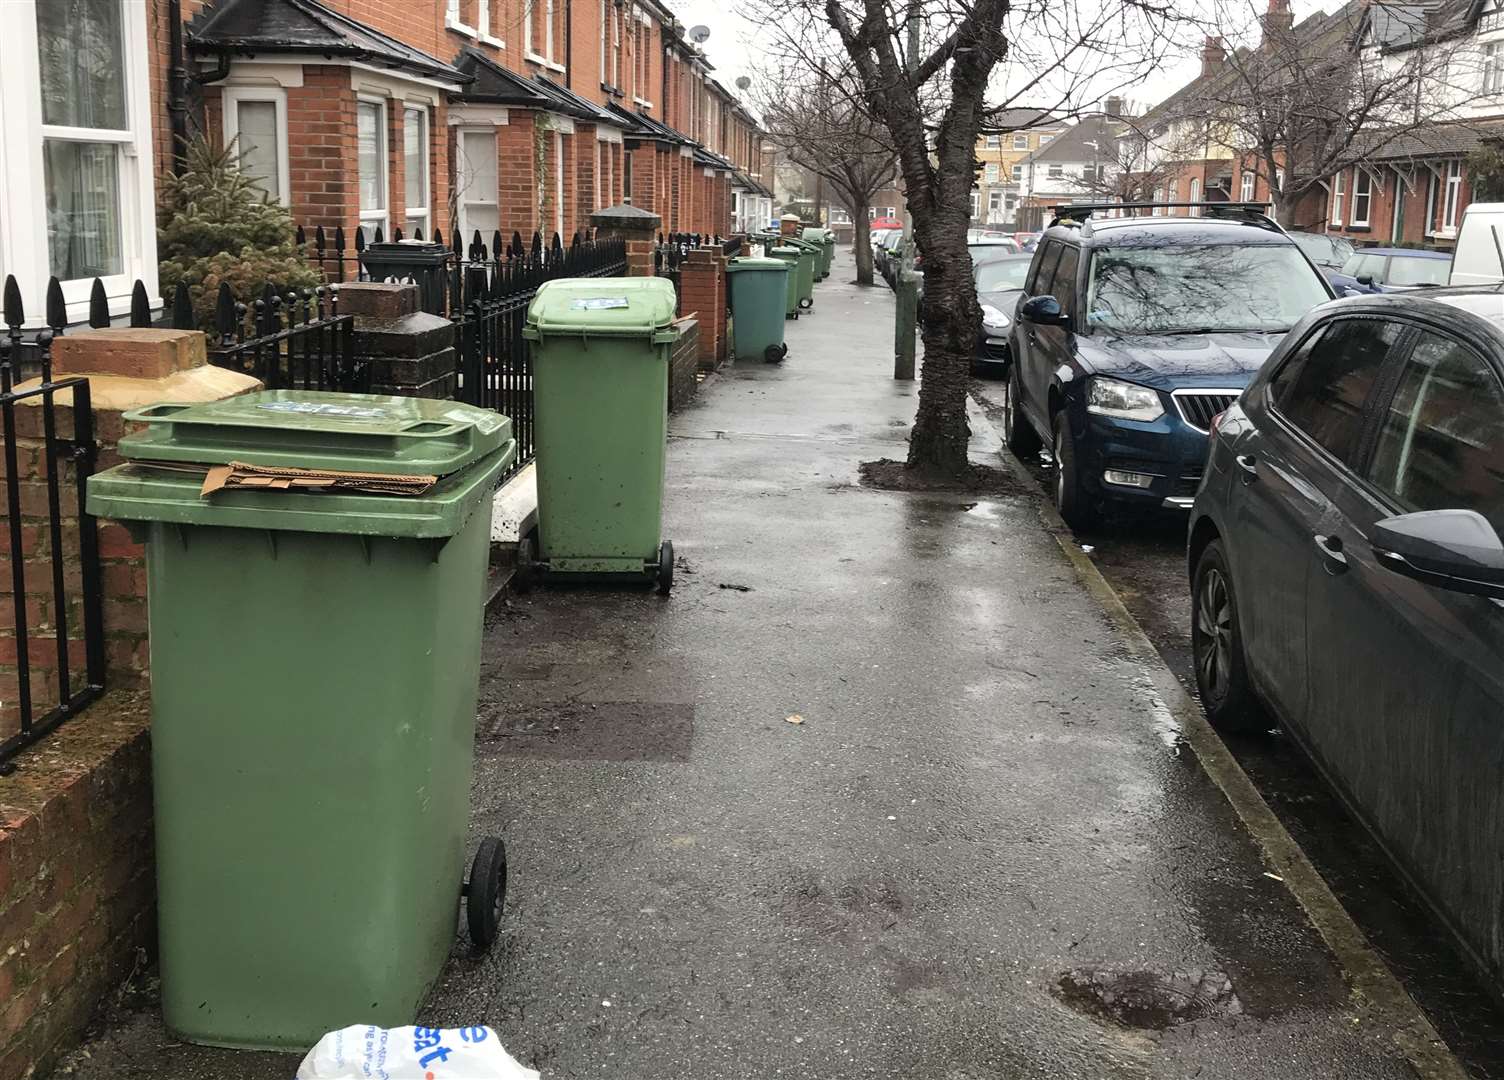 Bins full of recyclable rubbish left out in Maidstone where the borough council has advised people to take them back in